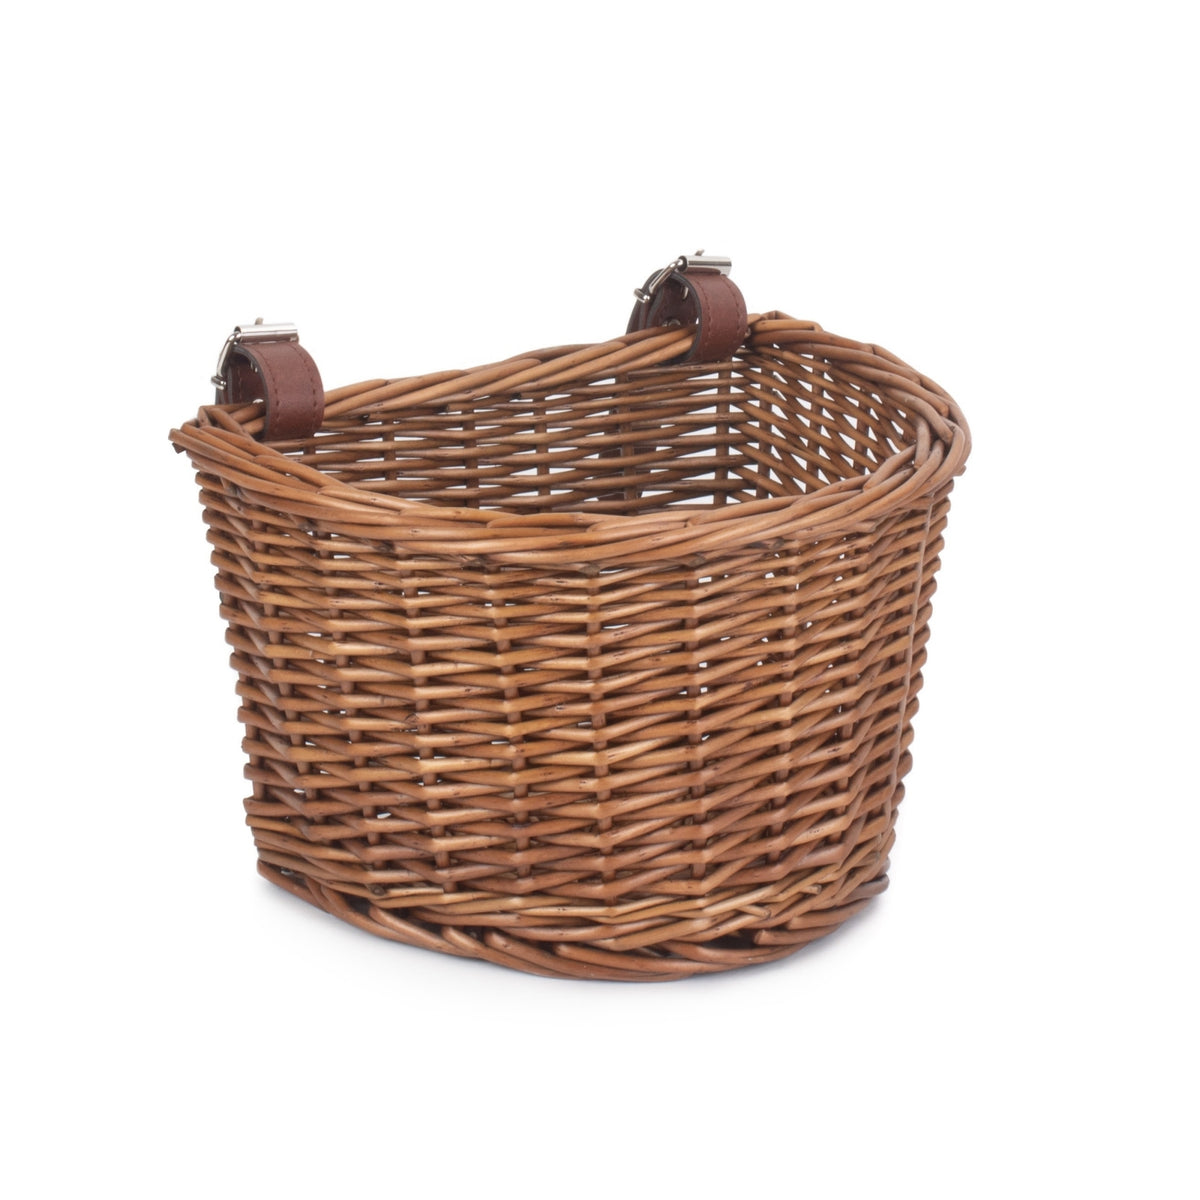 Child's Bicycle Wicker Basket